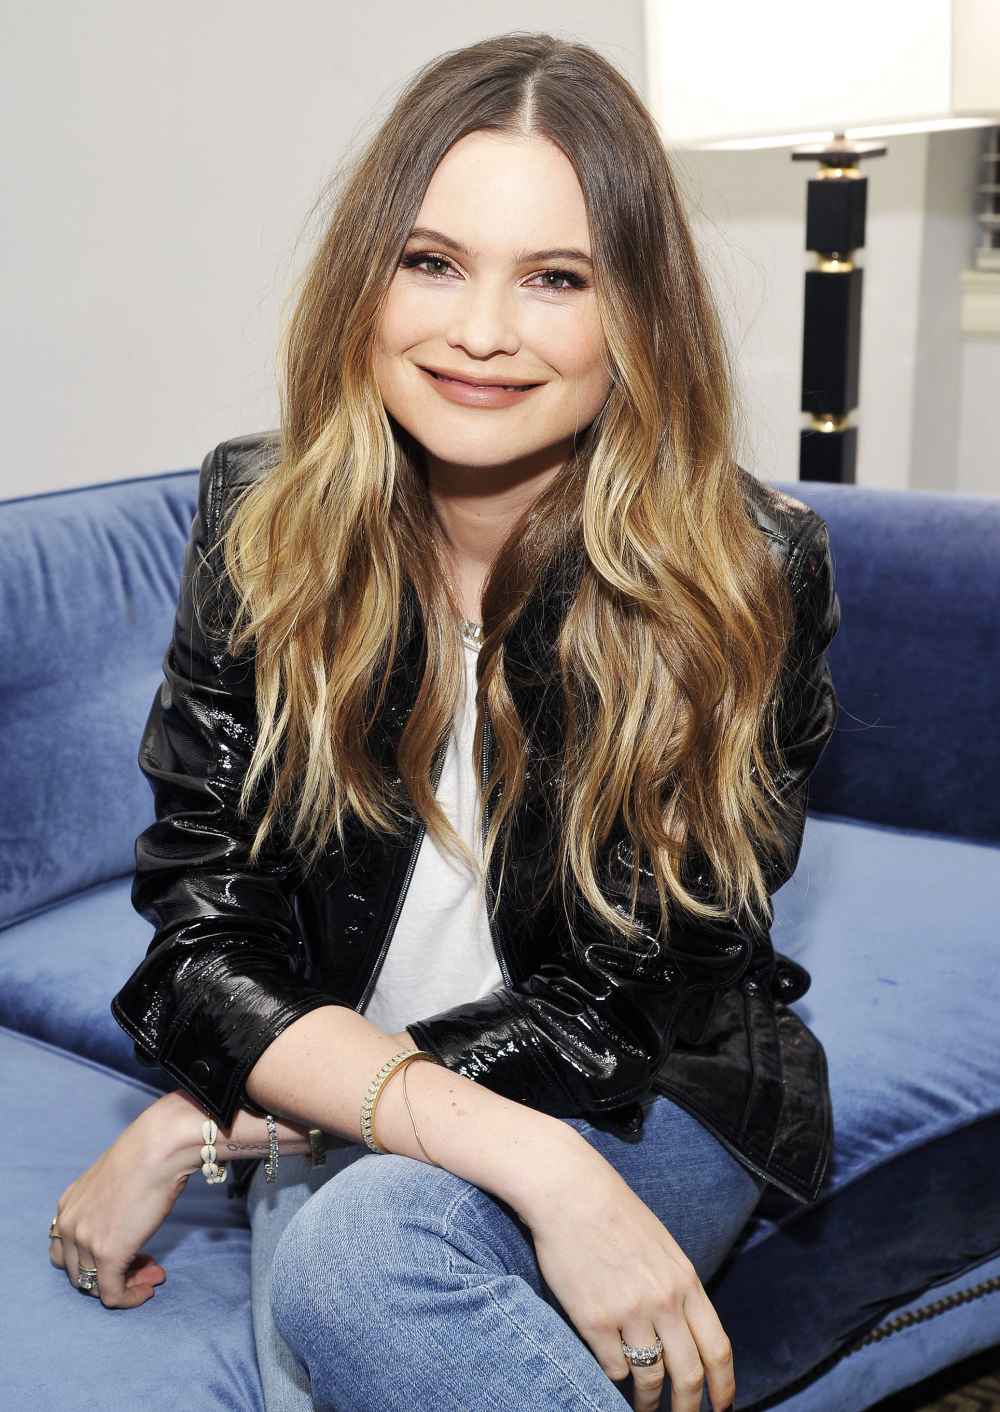 Behati Prinsloo Shares Video Playing With Daughter